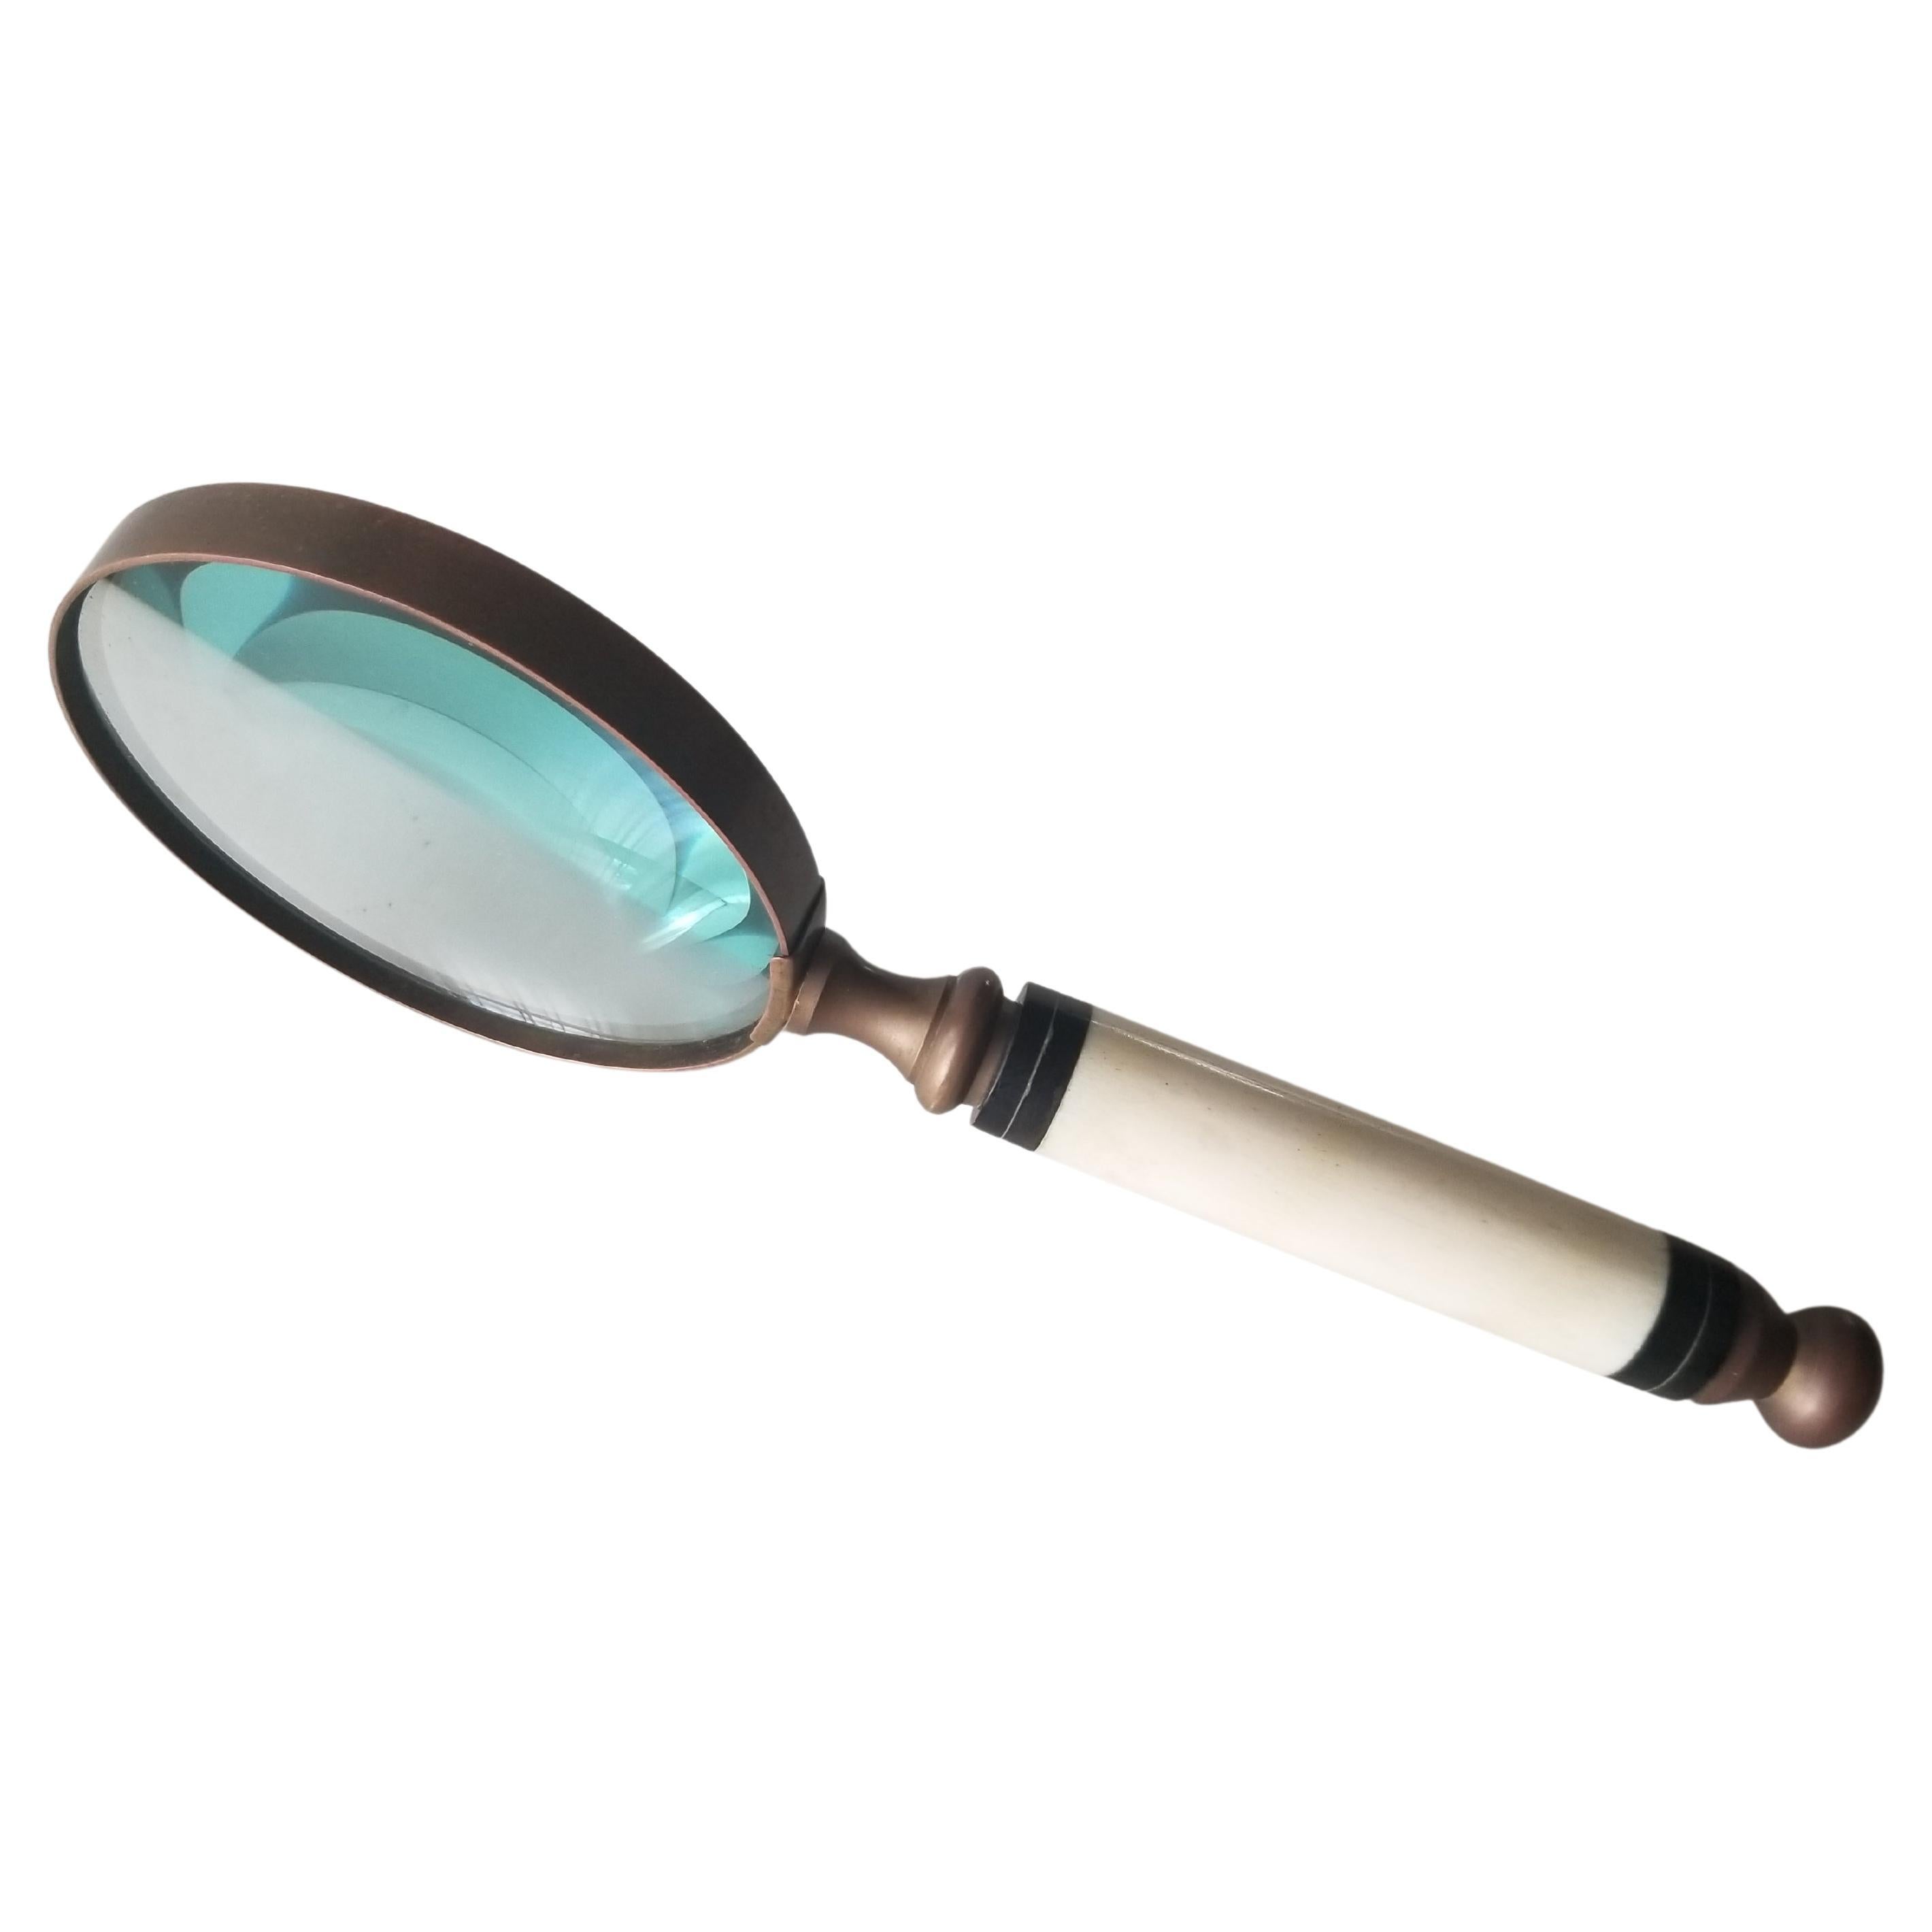 Magnifying glass
Vintage Regency Art Deco Magnifying Glass in Brass Bakelite Plastic Black and Antique White
10 L x 4w x 1h
Preowned original unrestored vintage condition.
See images provided.
 